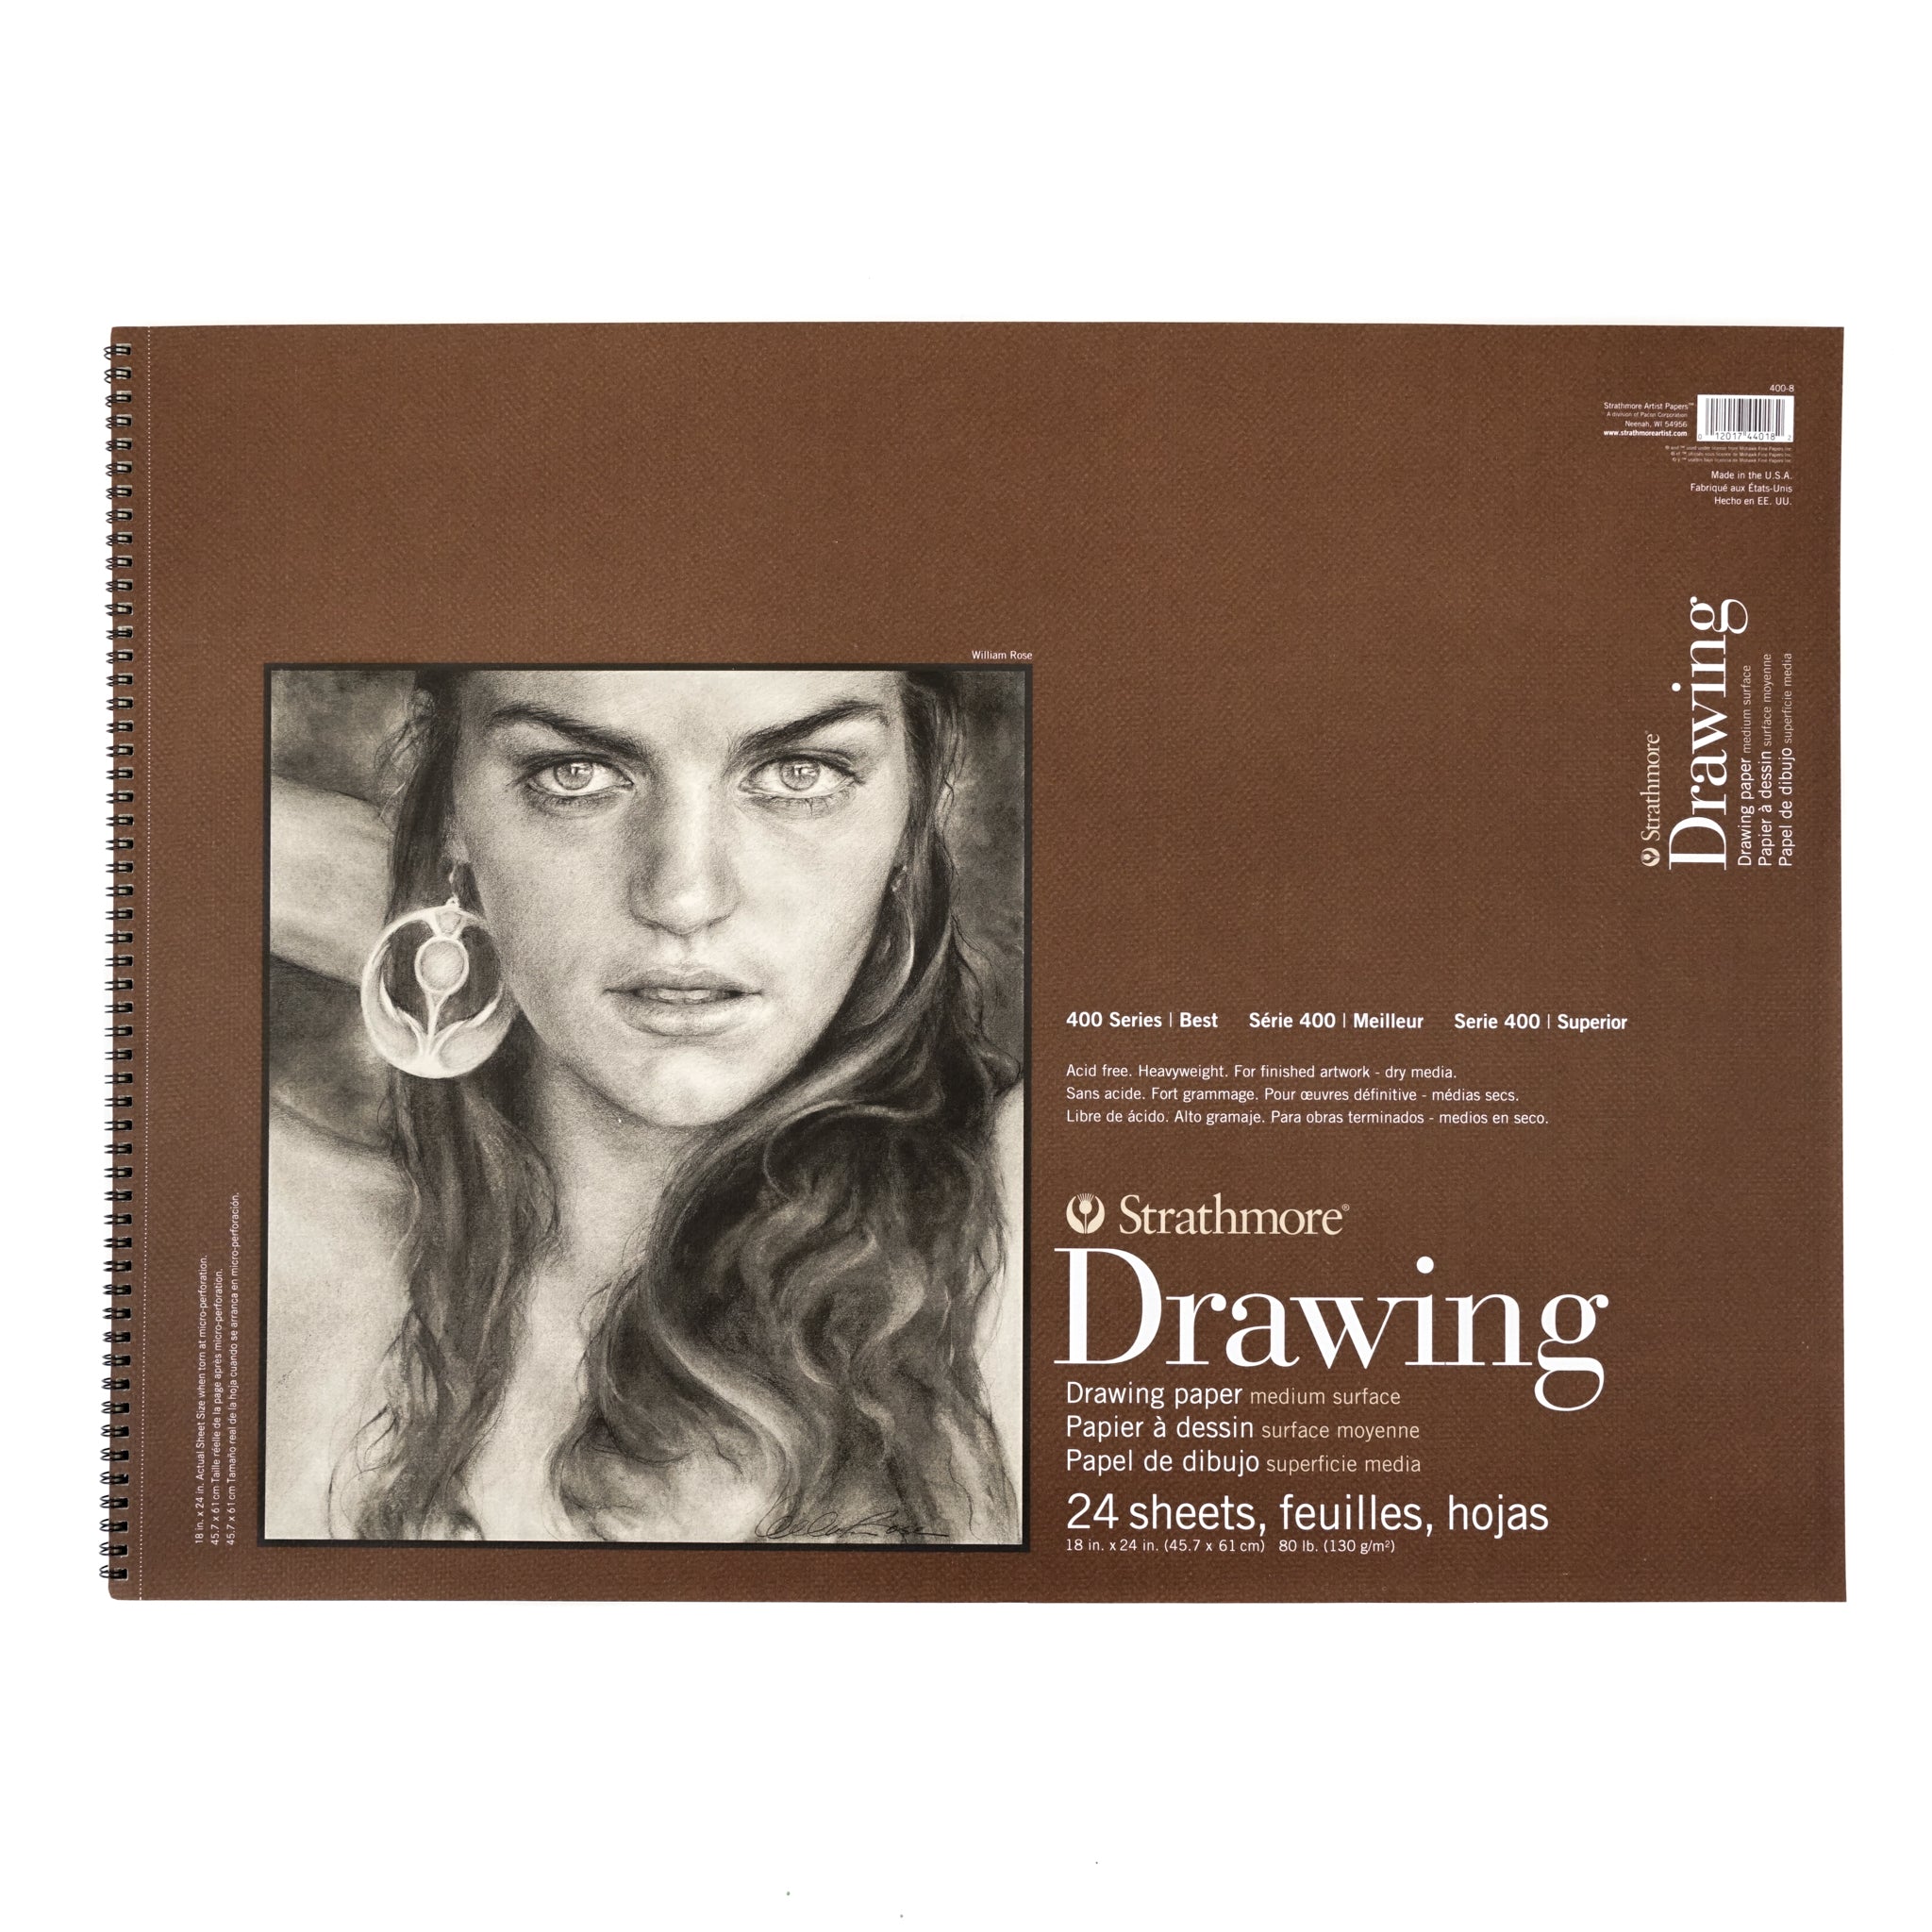 Strathmore Tracing Pad 11x14